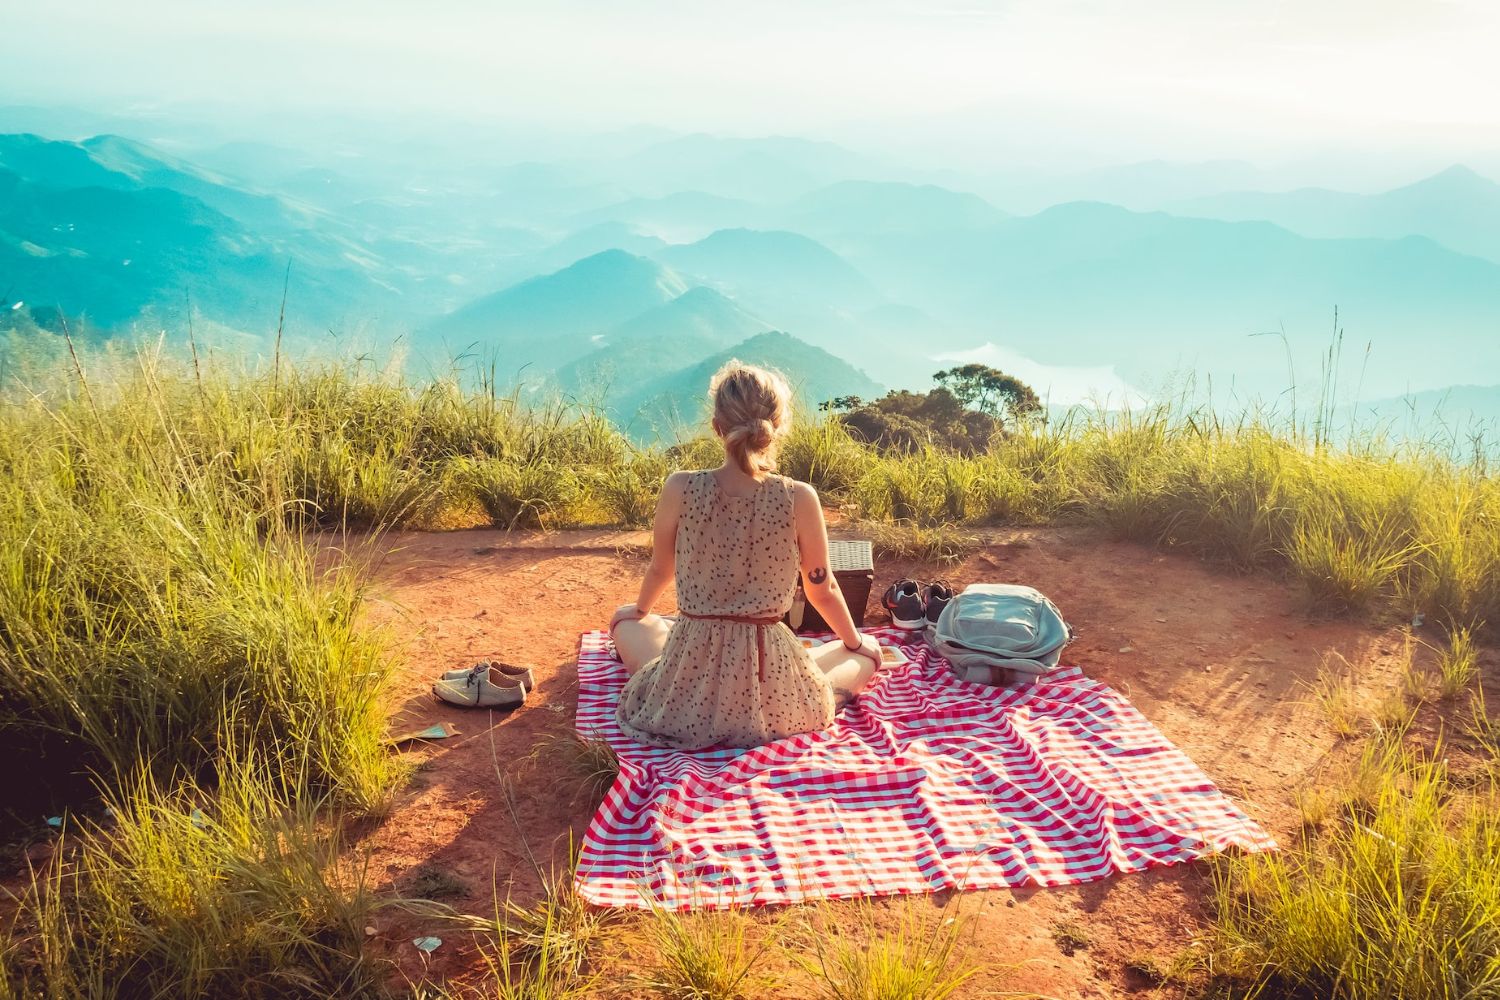 picnic photo of a girl on the hill by Willian Justen de Vasconcellos on Unsplash  